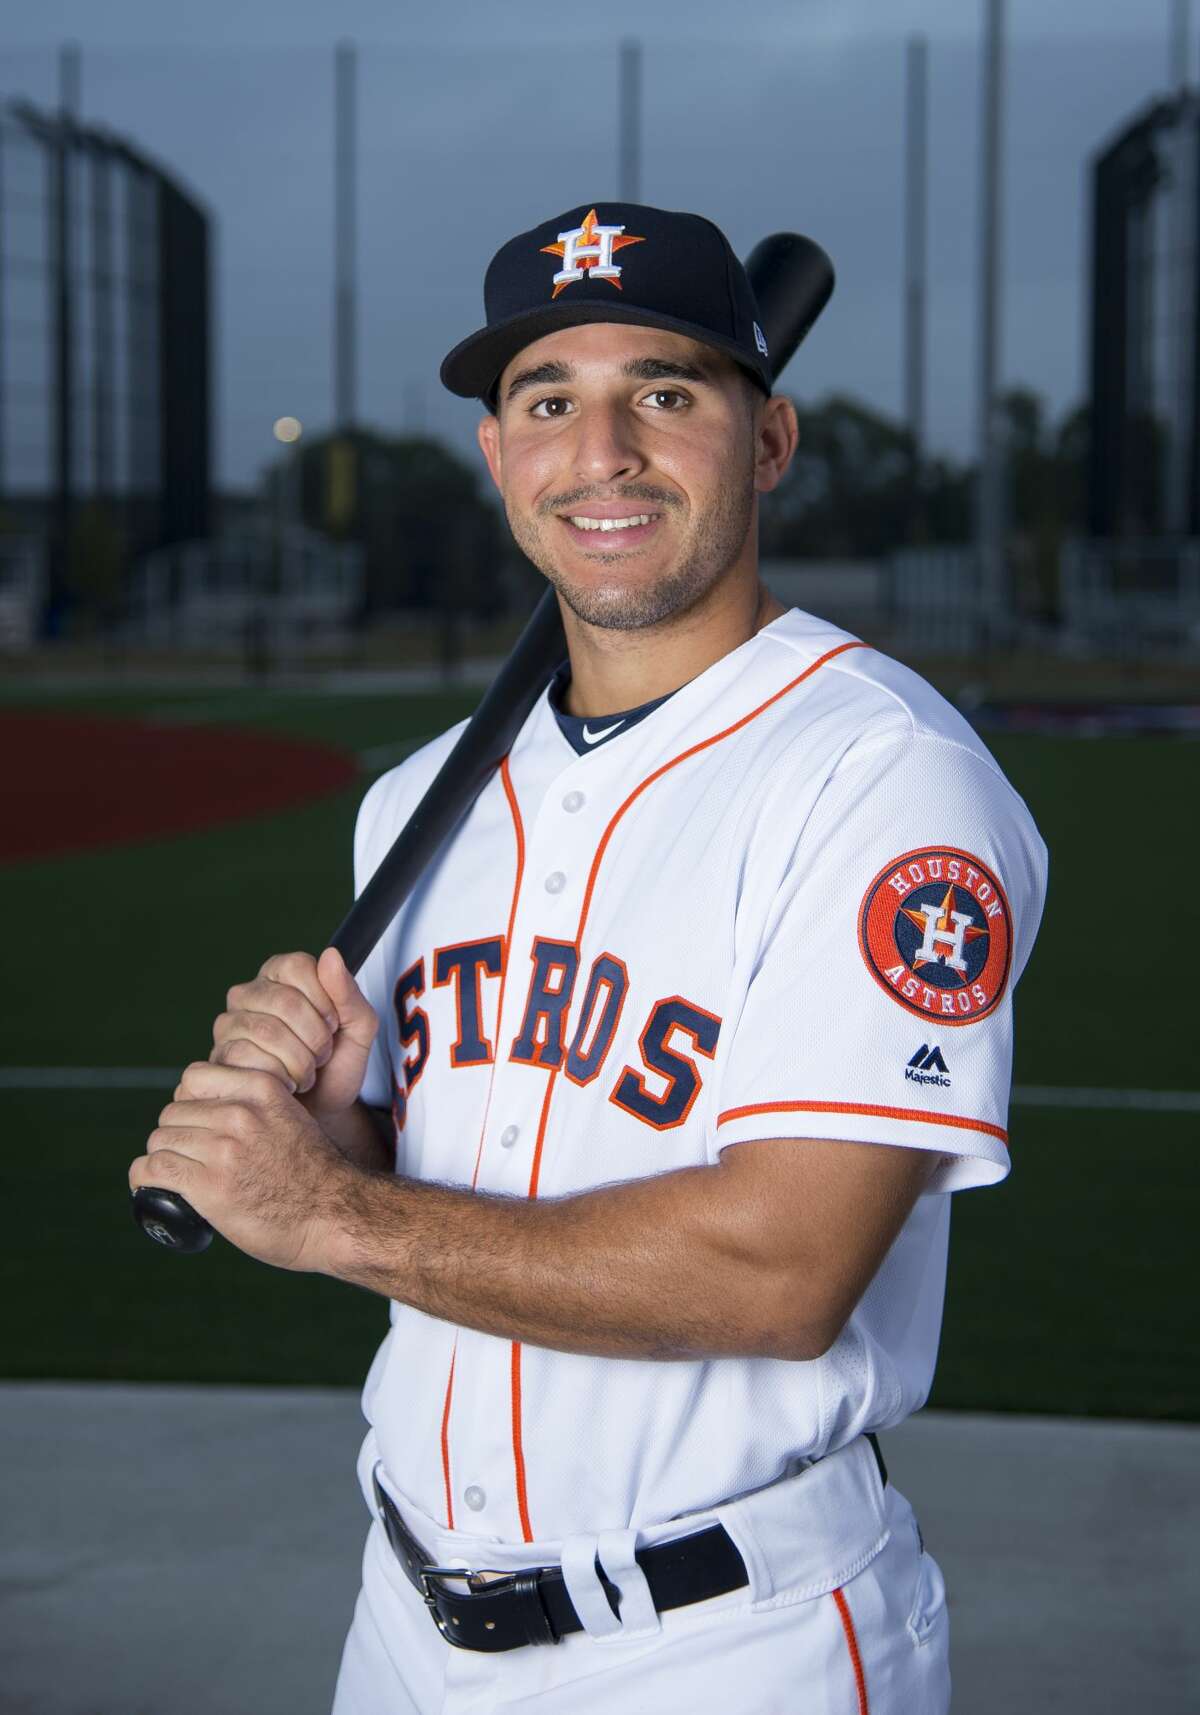 WEST PALM BEACH, FL - FEBRUARY 19: Houston Astros Non-Roster Invitee Outfielder Ramon Laureano (78) poses for a portrait during Houston Astros Photo Day at The Ballpark of the Palm Beaches on February 19, 2017 in West Palm Beach, Florida. (Photo by Doug Murray/Icon Sportswire via Getty Images)